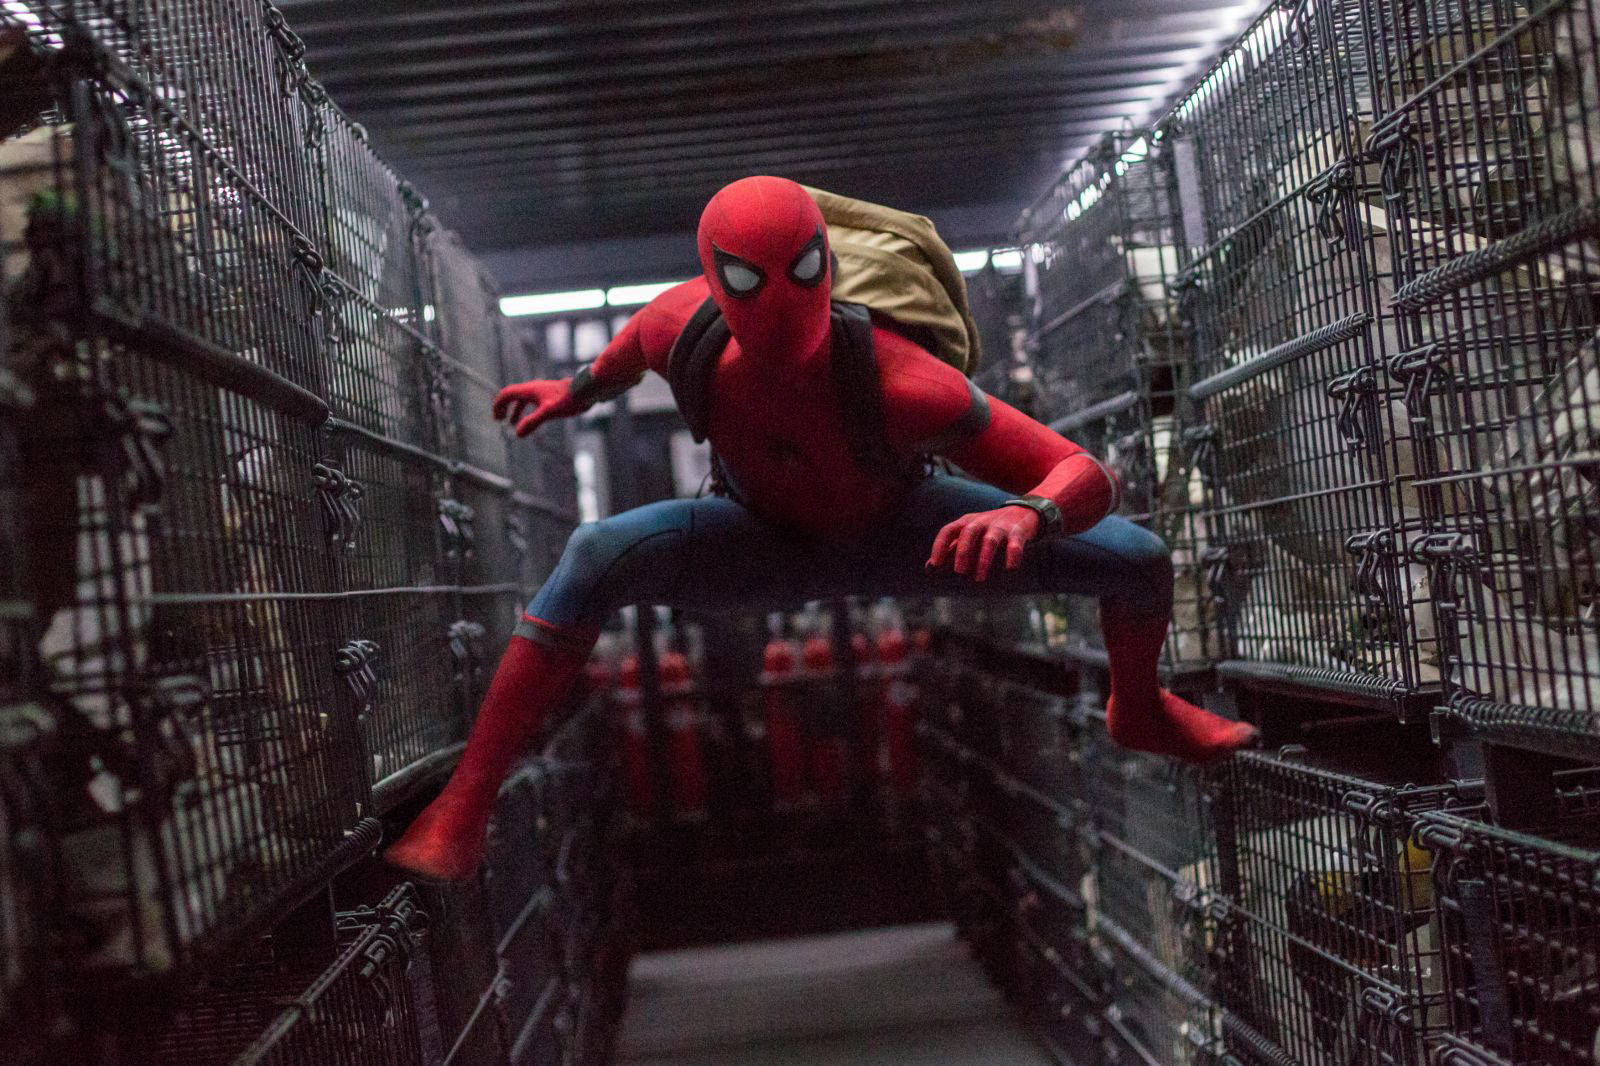  Shot from Spiderman: Returning Home